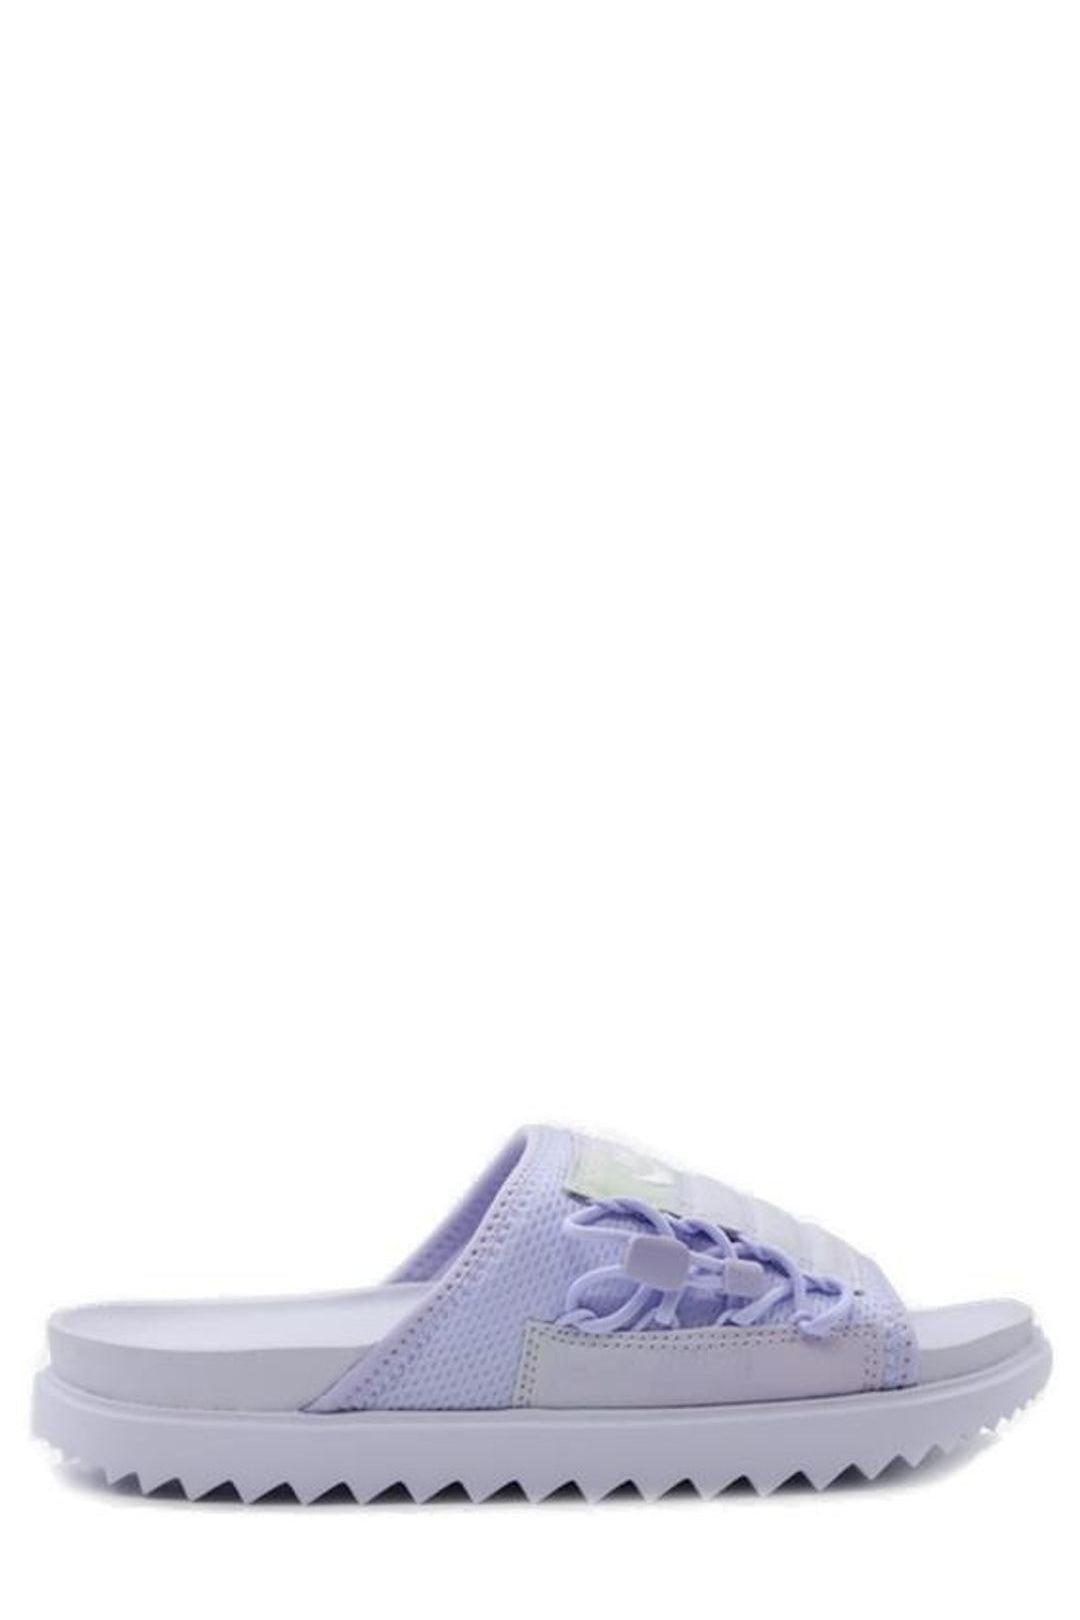 Nike Asuna Logo Embroidered Slides in Purple | Lyst